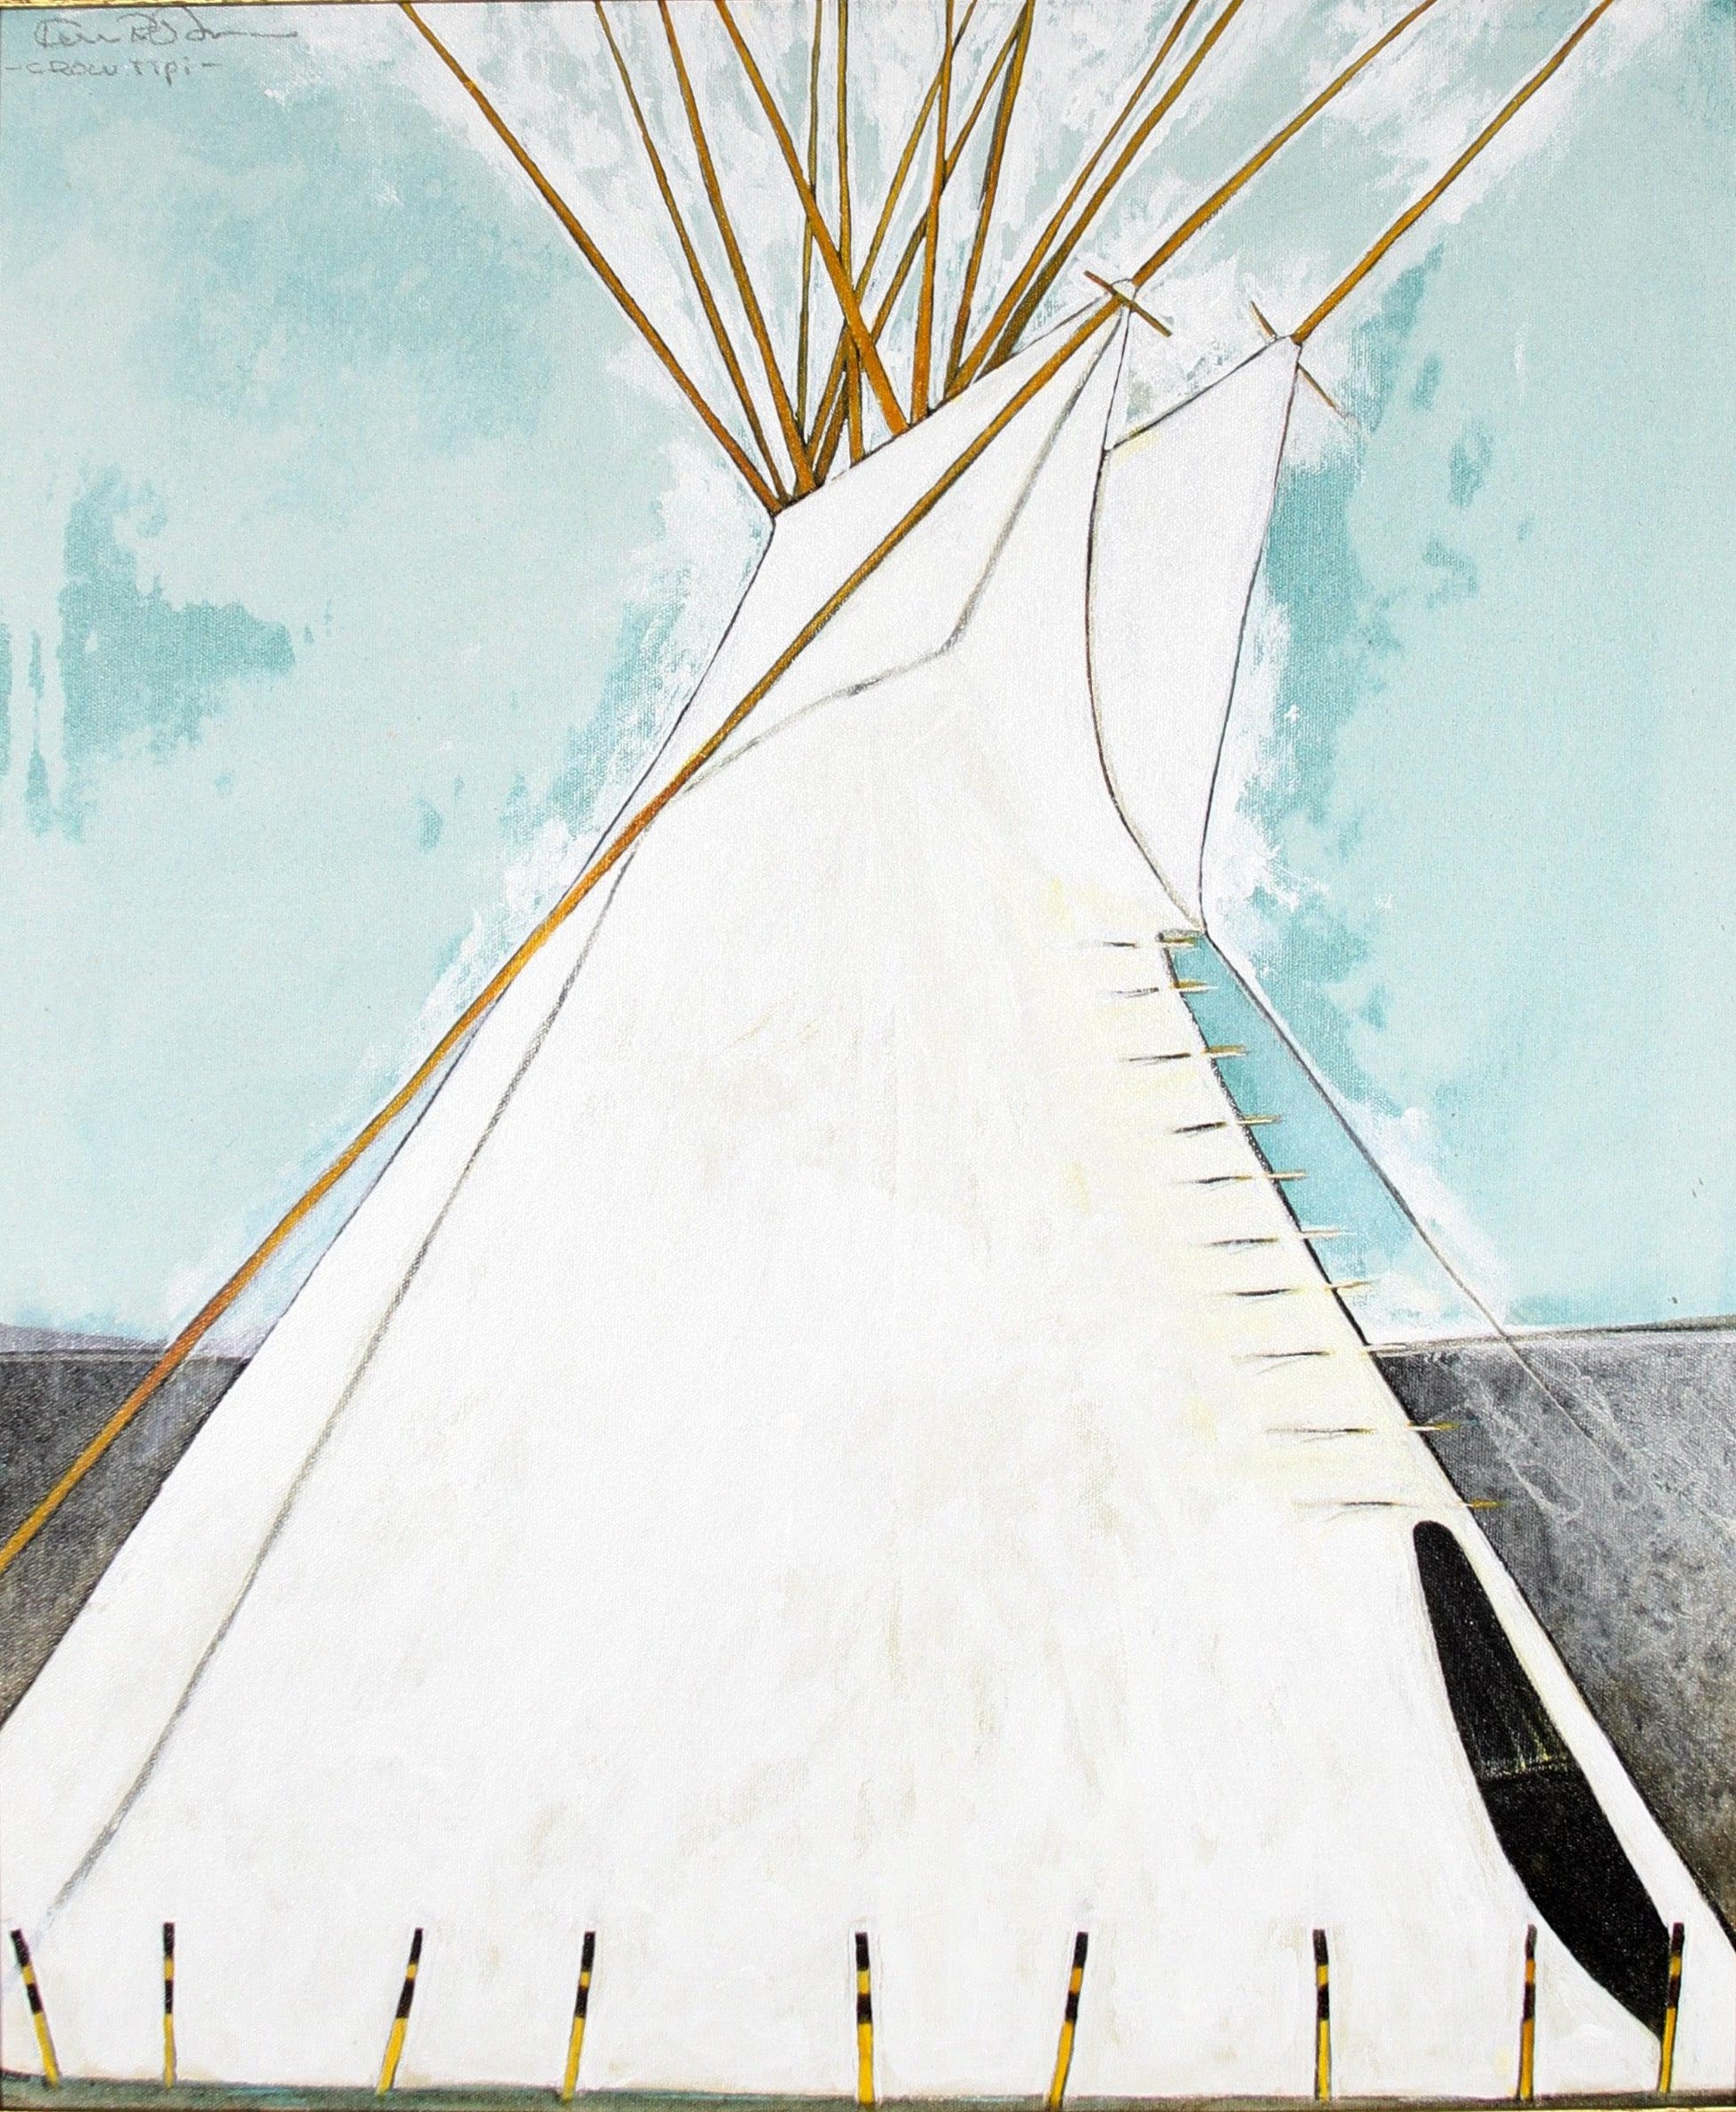 Northern Plains Crow Tipi-Painting-Kevin Red Star-Sorrel Sky Gallery